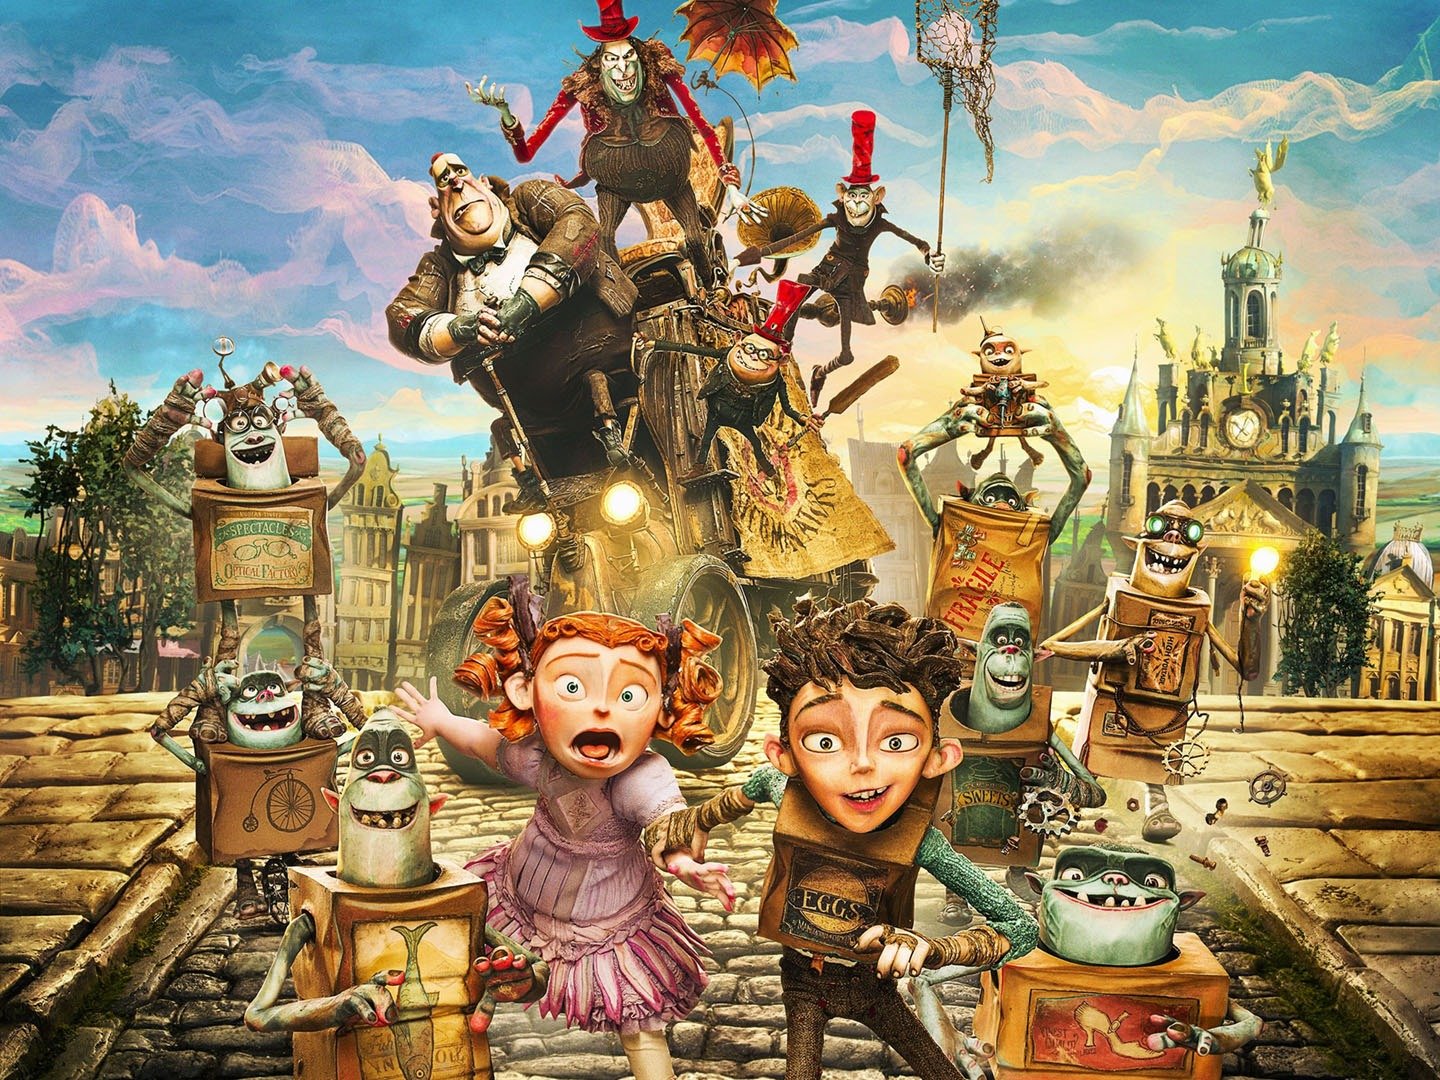 The Boxtrolls Trailer 1 Trailers And Videos Rotten Tomatoes